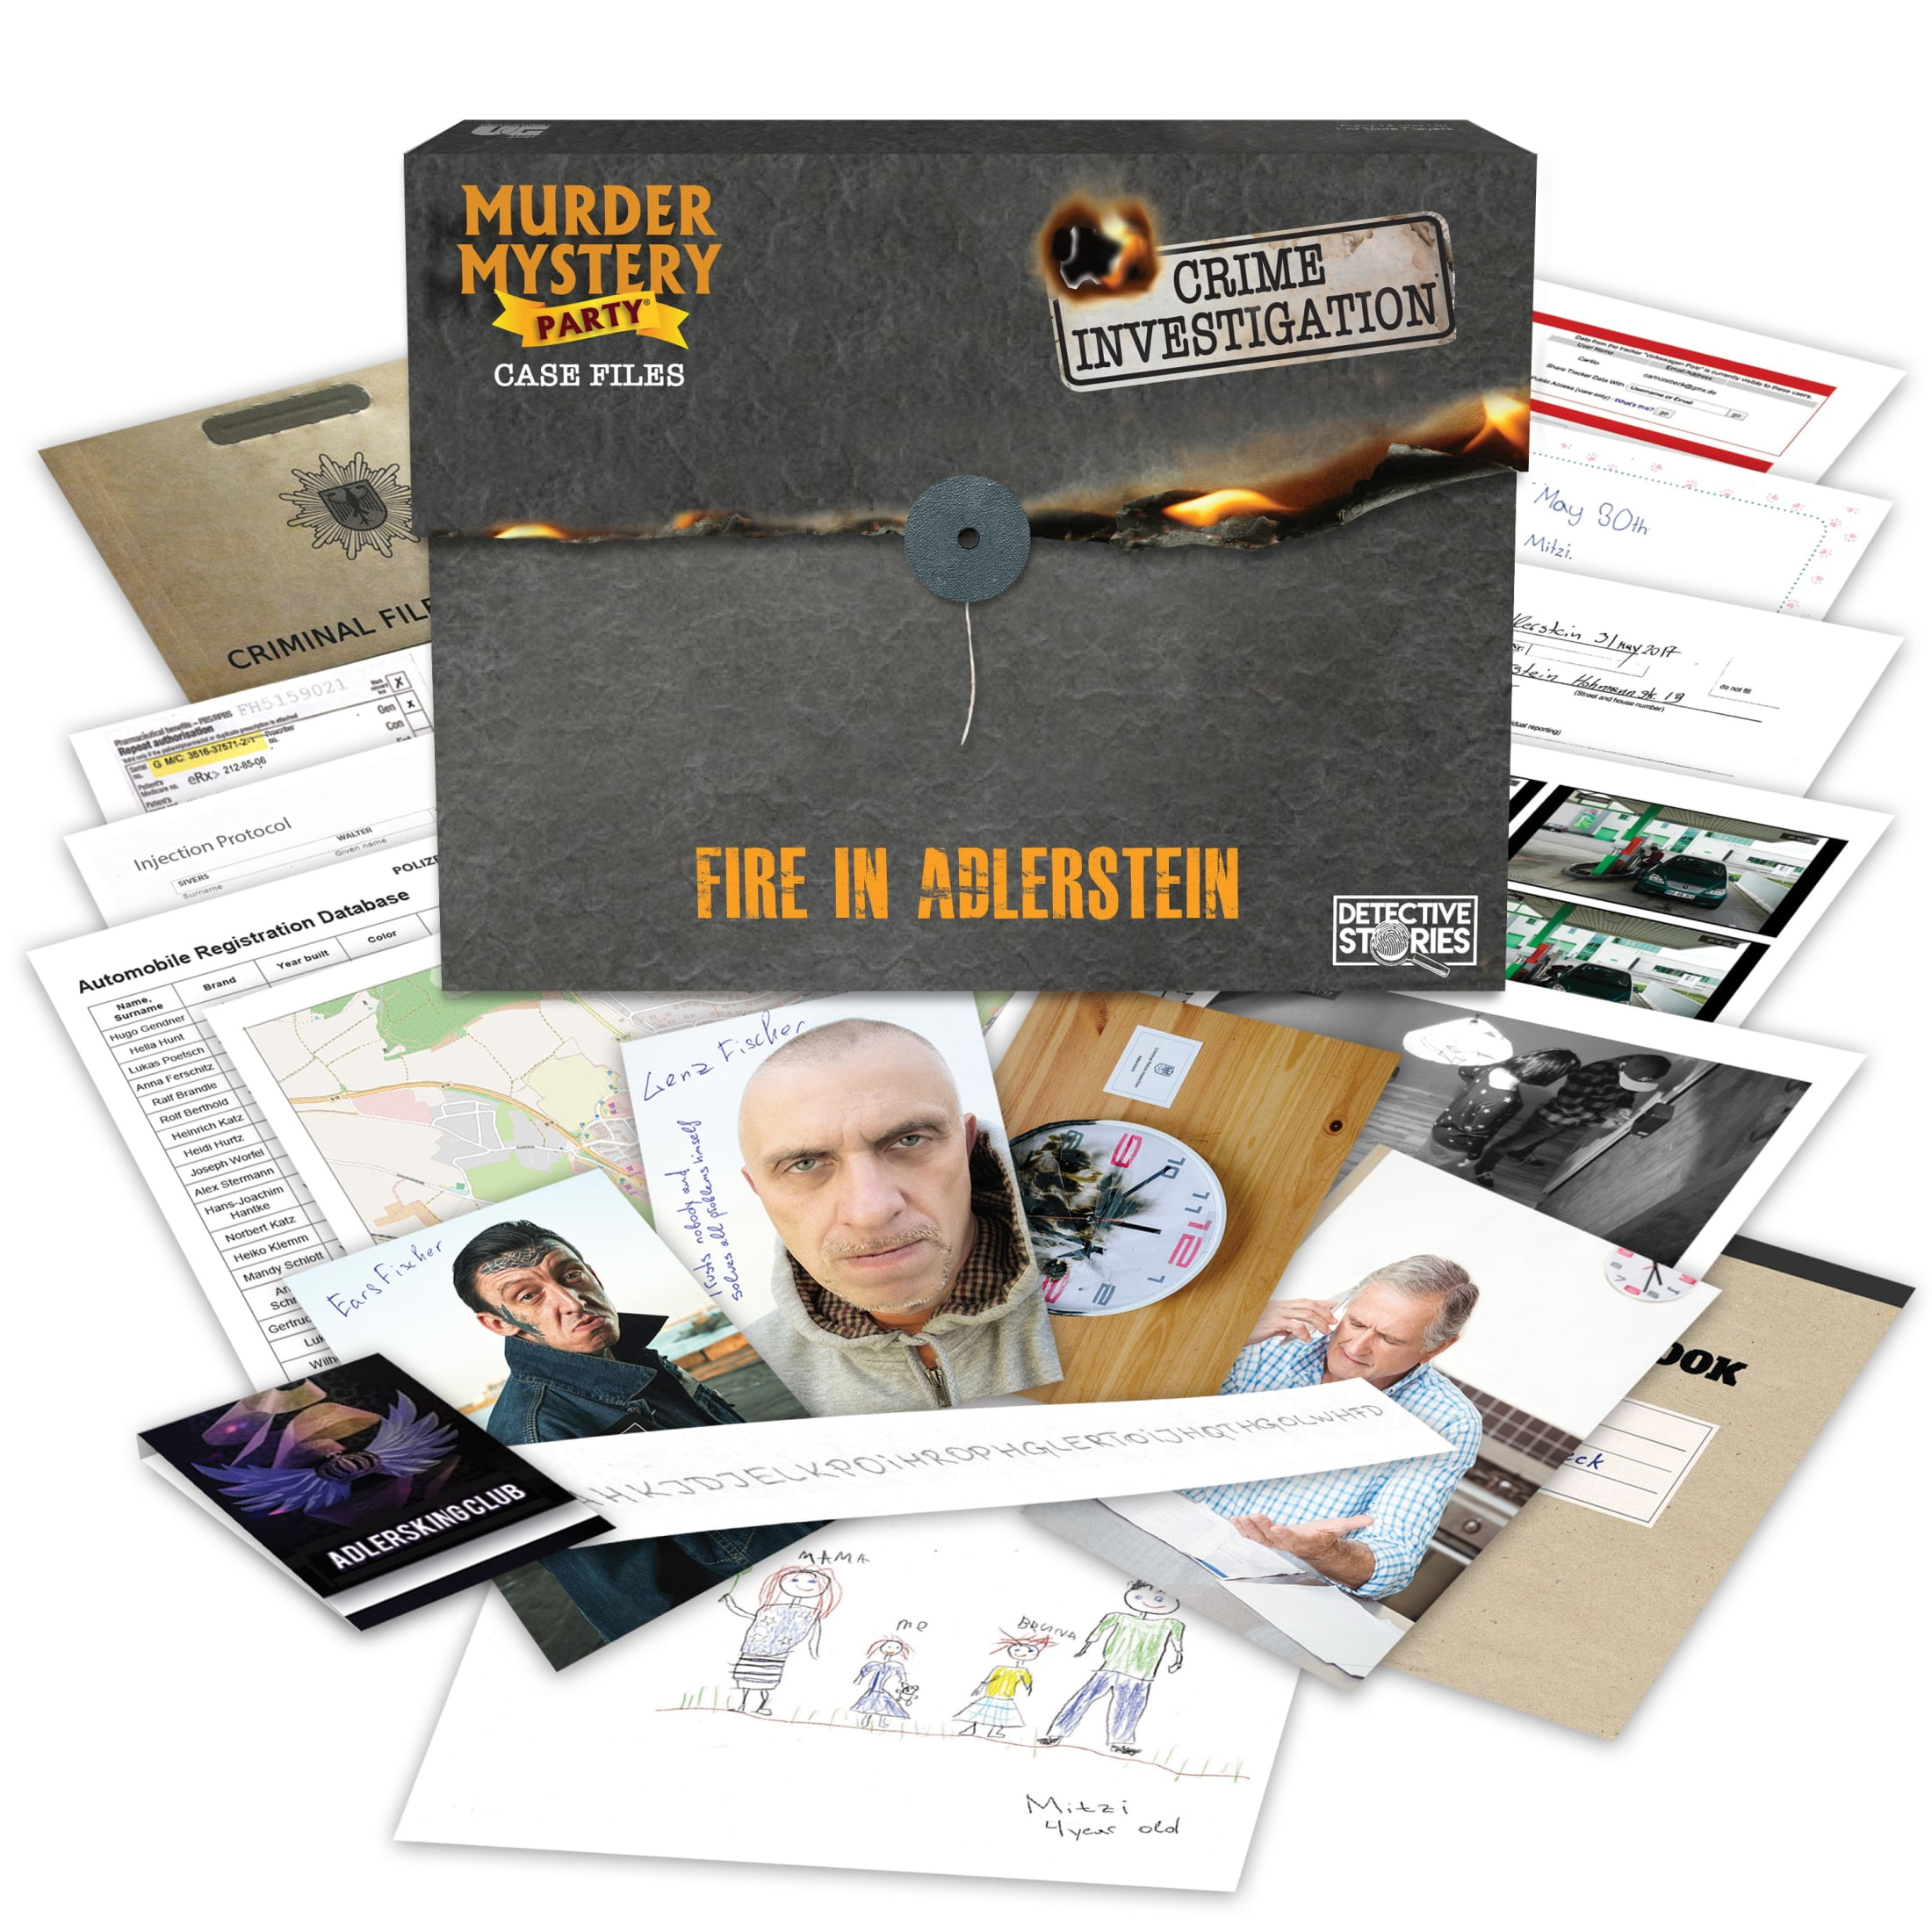 Printable Murder Mystery Game-digital Case-unsolved Mystery 